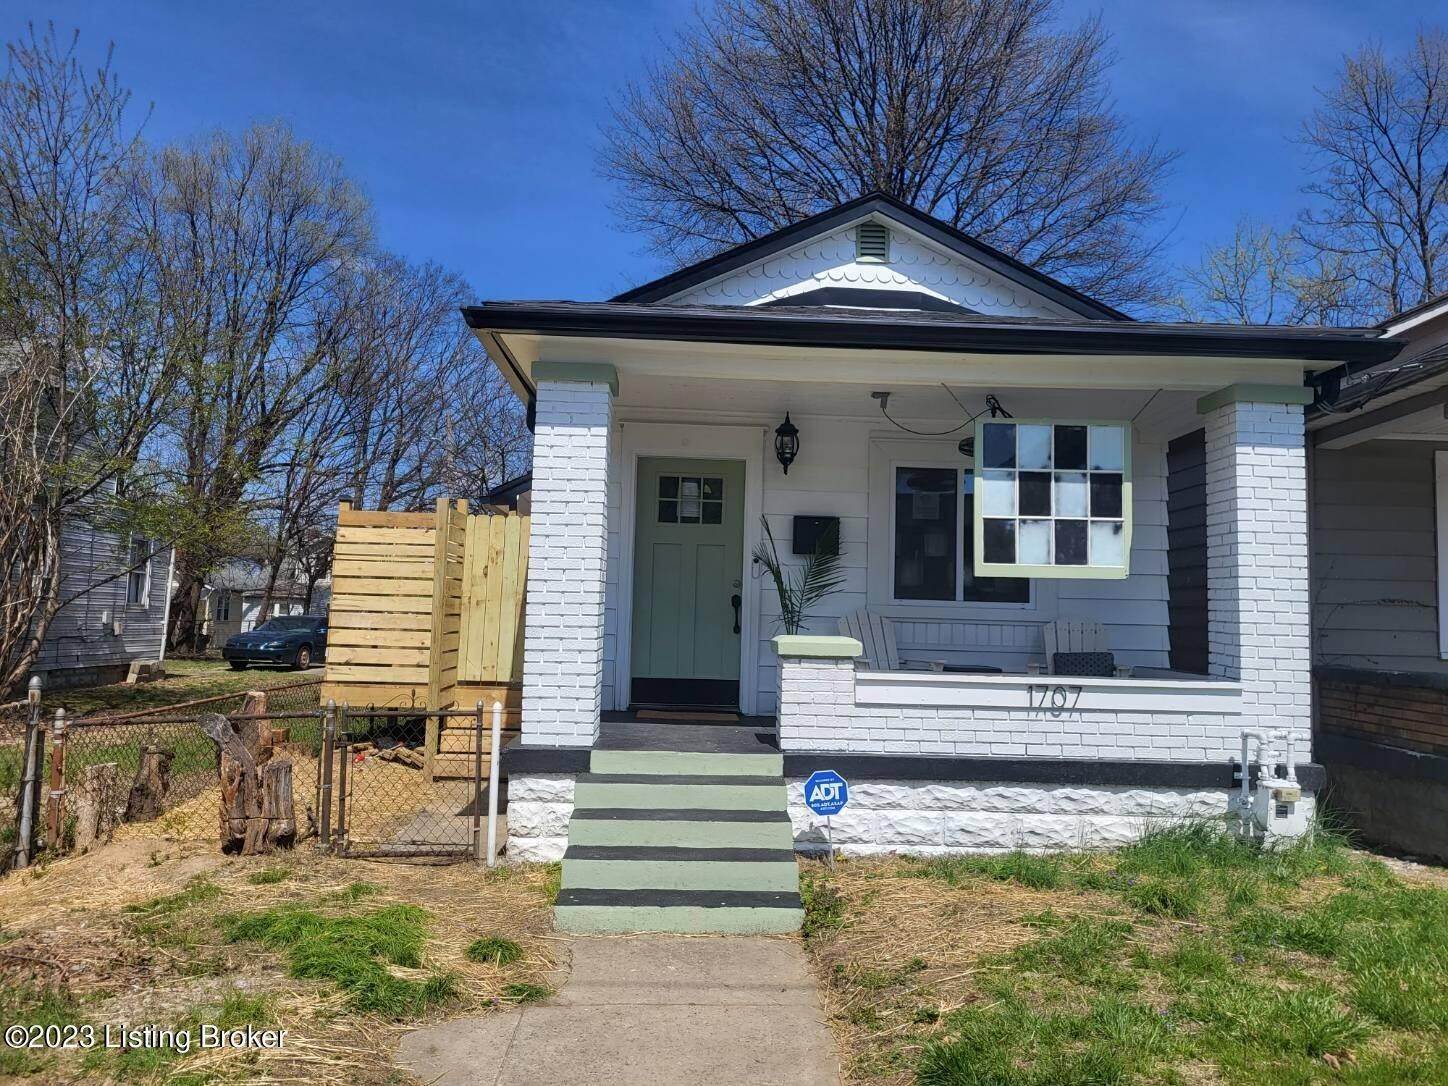 Single Family at Louisville, KY 40210